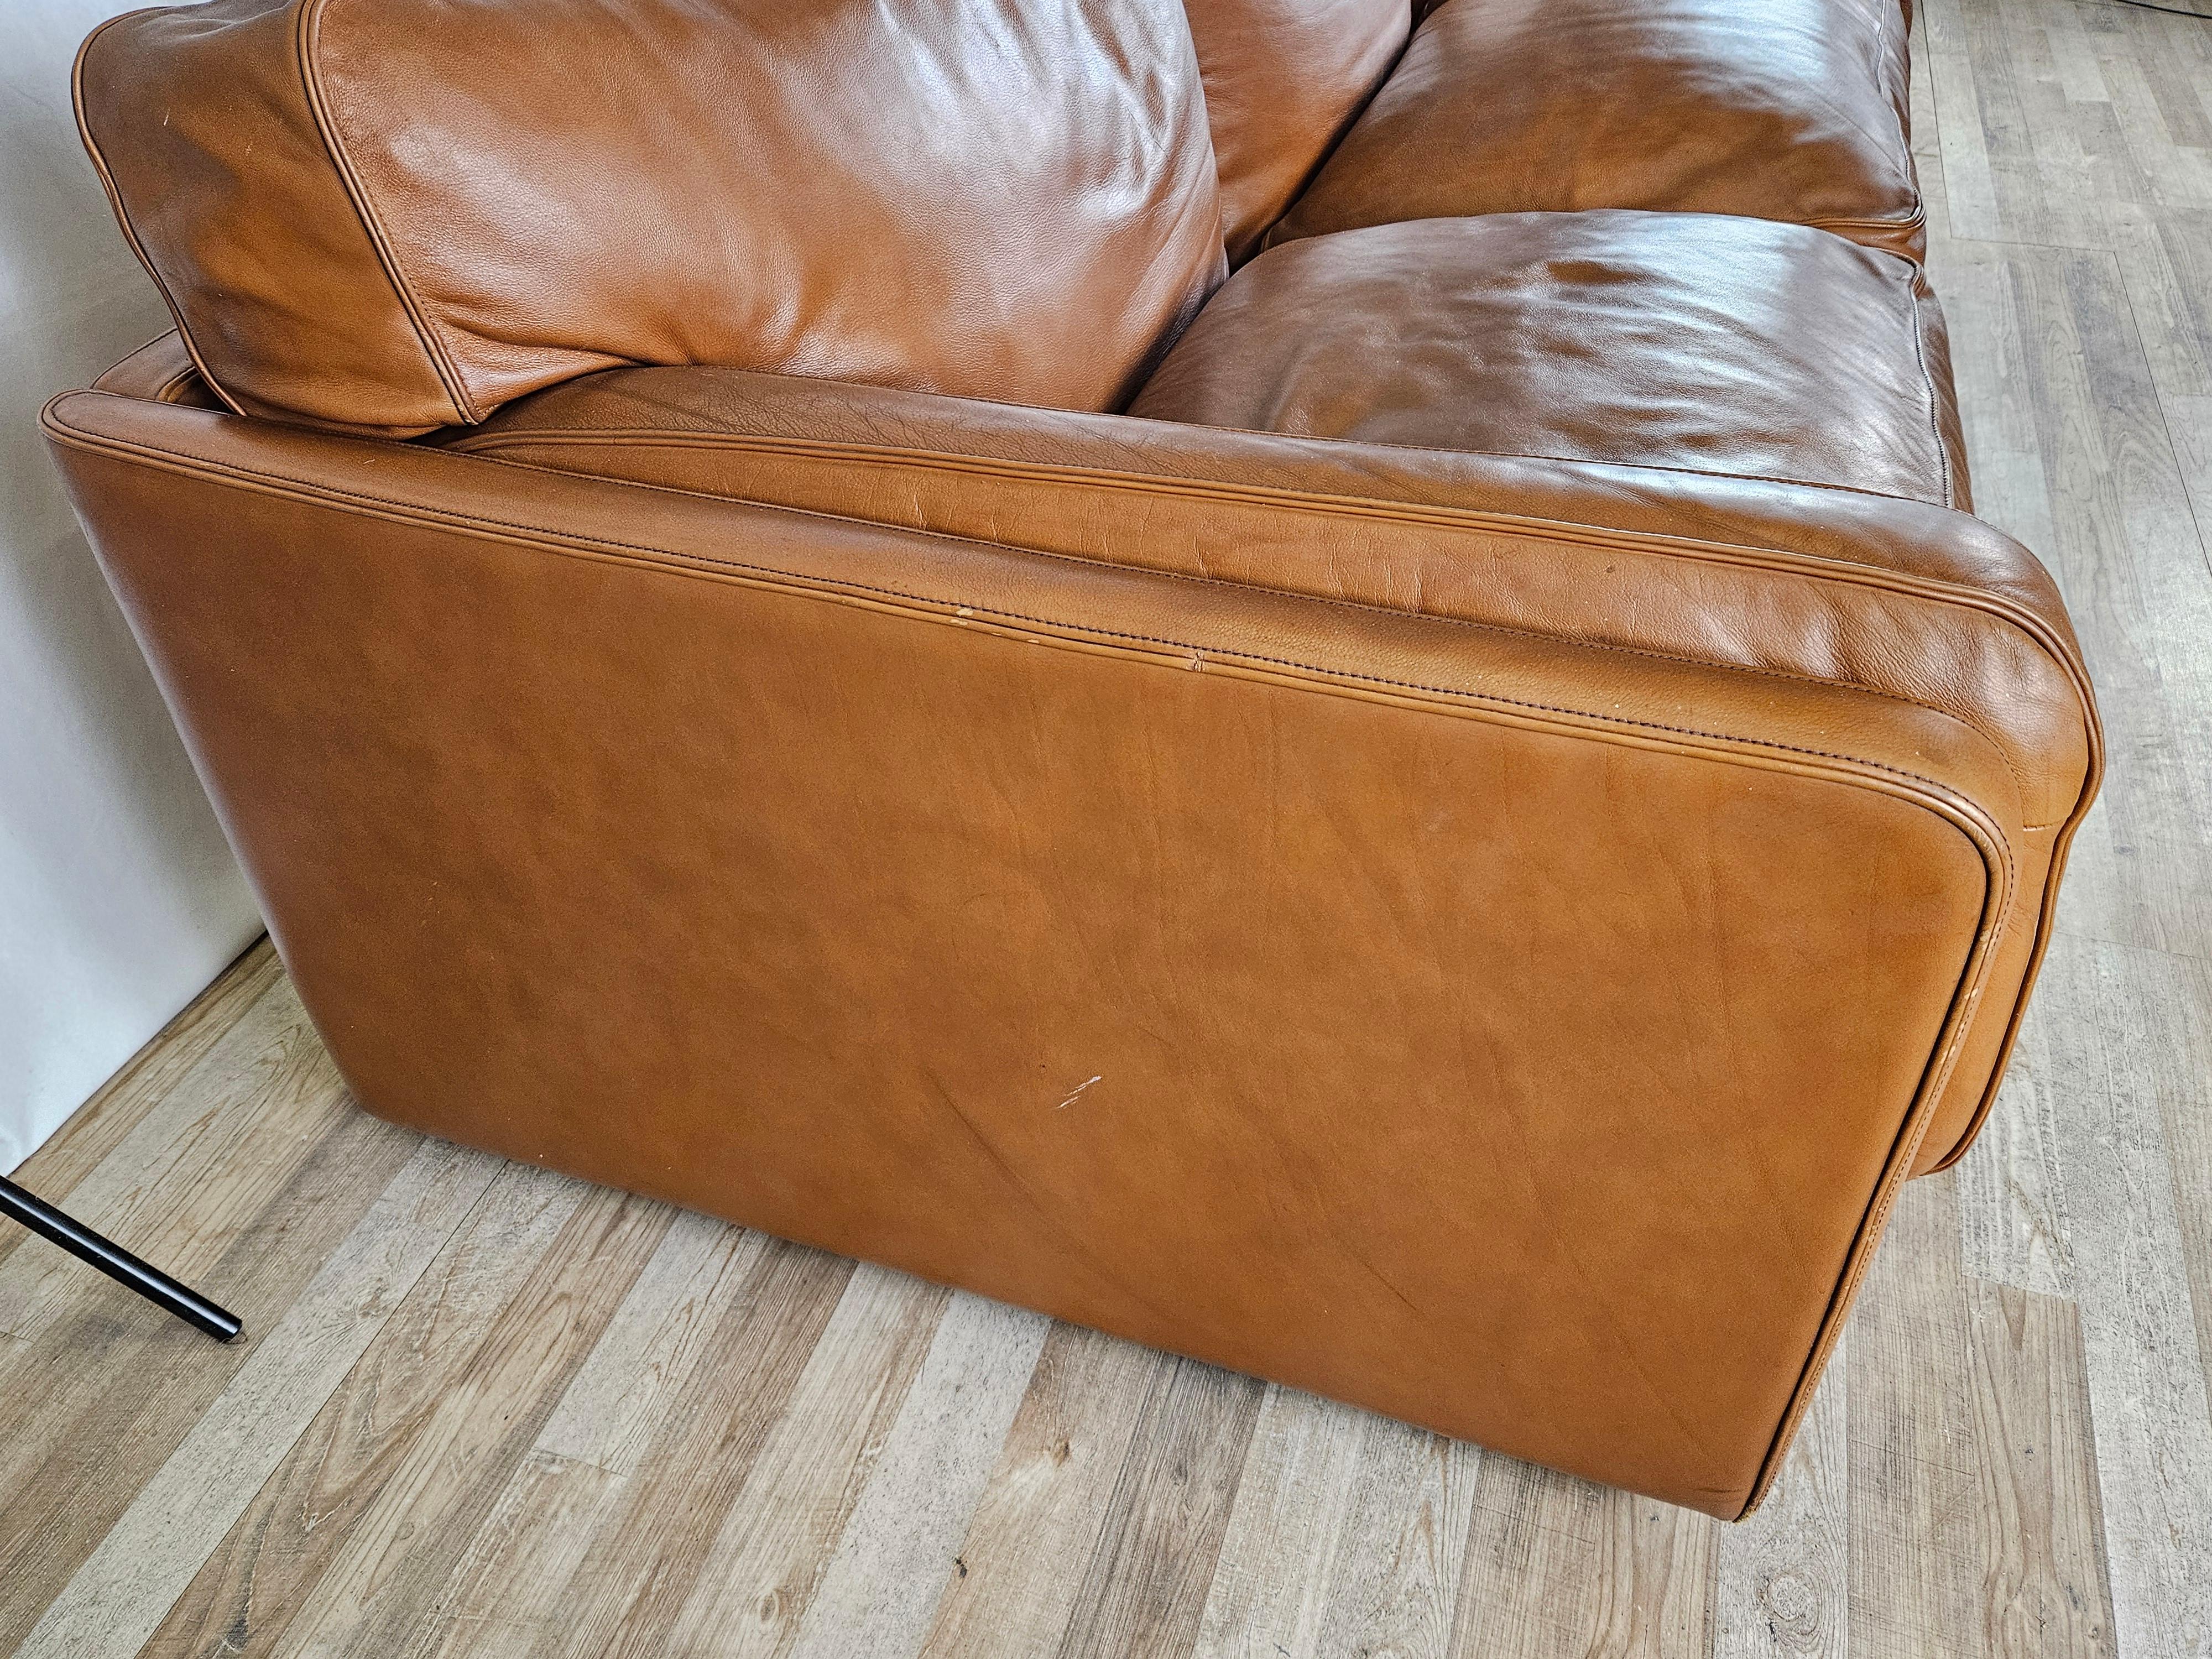 Iconic Italian-made sofa from the 1970s, made by Poltrona Frau for a high-end design that will enhance any room where placed.

This is a three-seater sofa in cognac leather with large, cozy cushions on the seat and back.

Under each seat is the